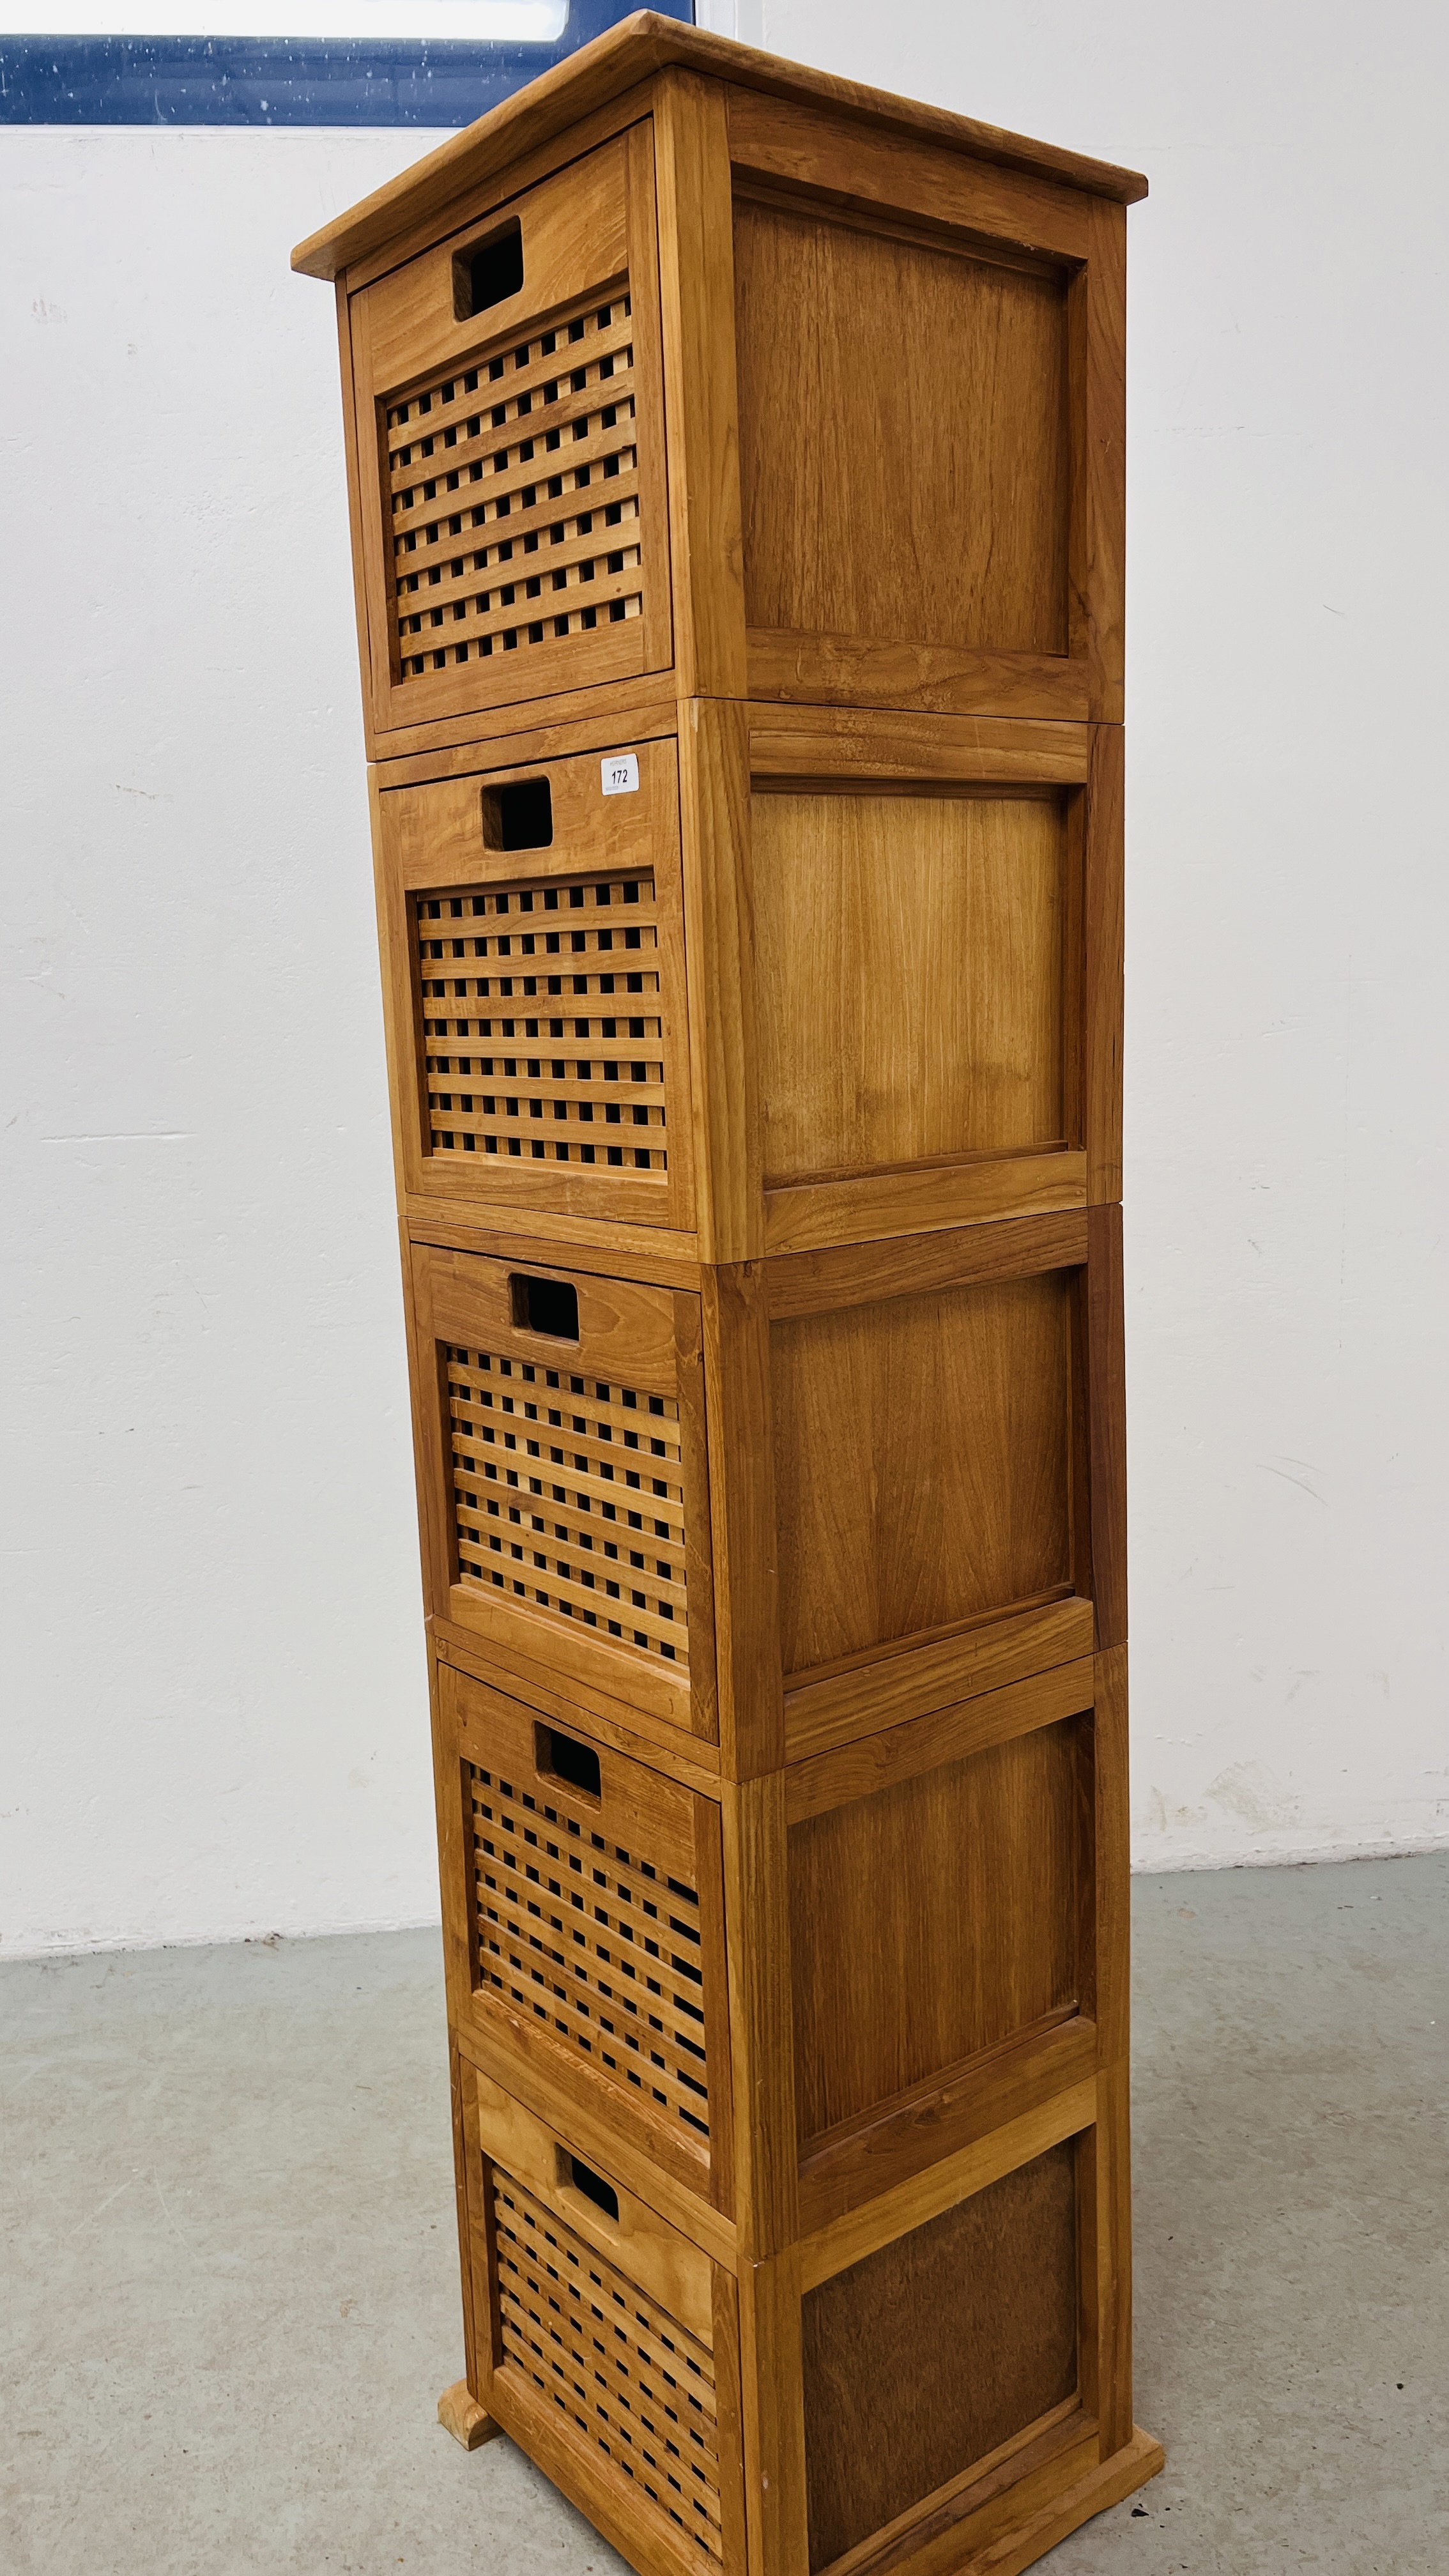 A 5 SECTION WOODEN SLATTED FRONT STACKING DRAWER TOWER. 1 DRAWER A/F - W 43CM. X H 171CM. X D 41CM. - Image 6 of 6